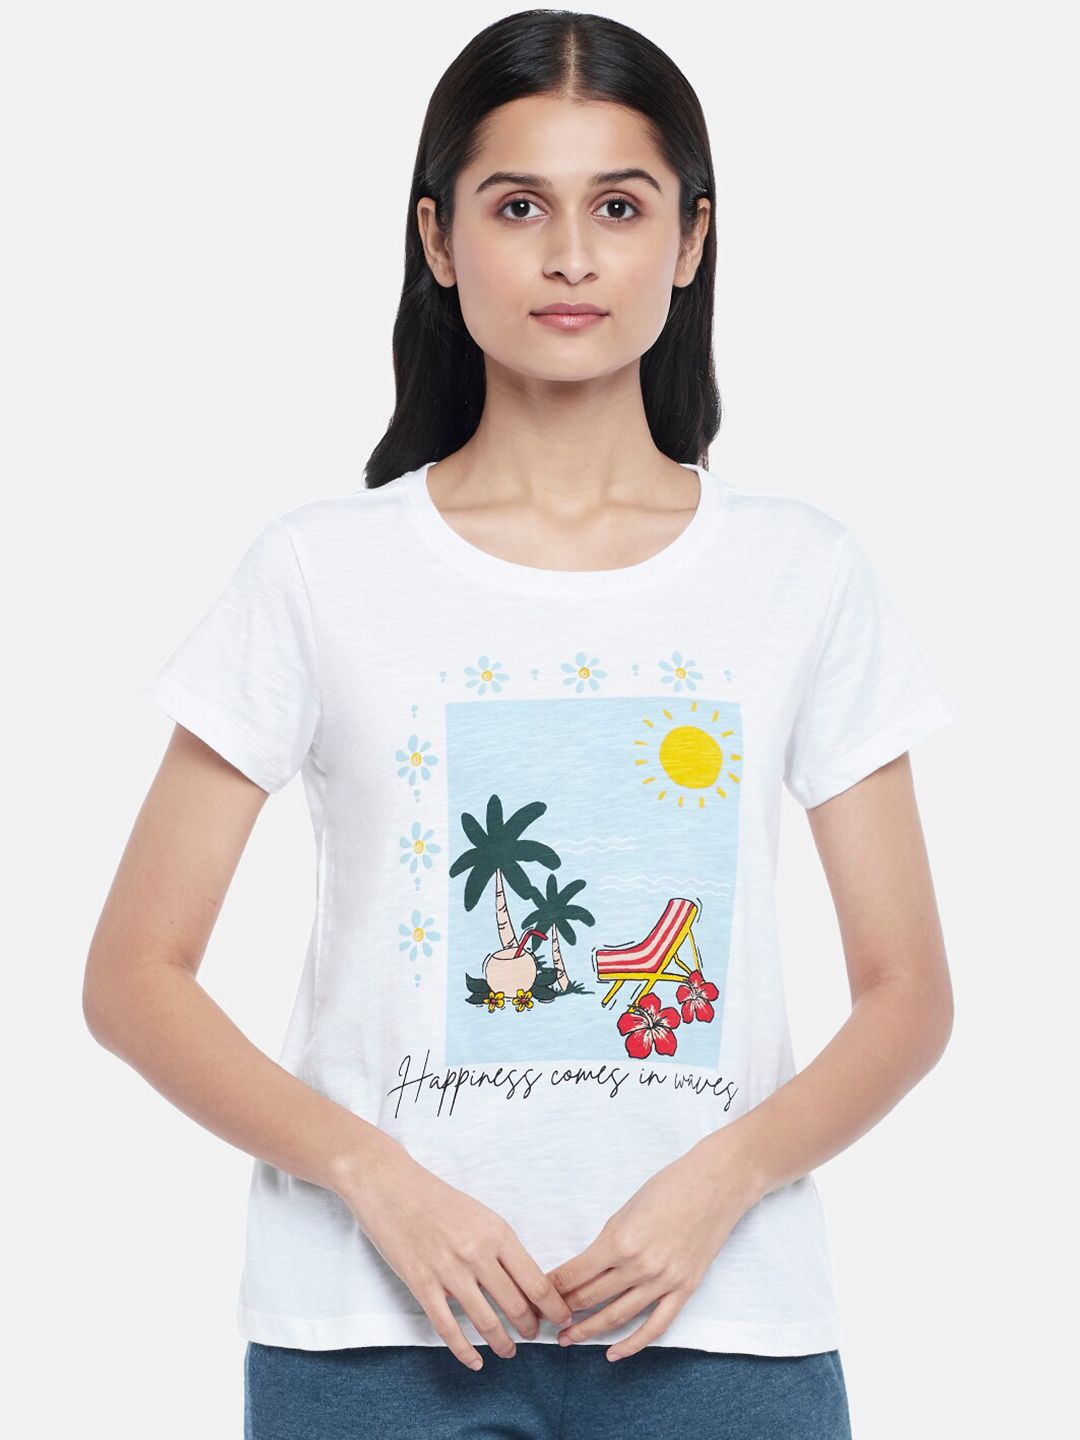 Dreamz by Pantaloons Women White Typography Printed Short Sleeves Lounge T-shirt Price in India